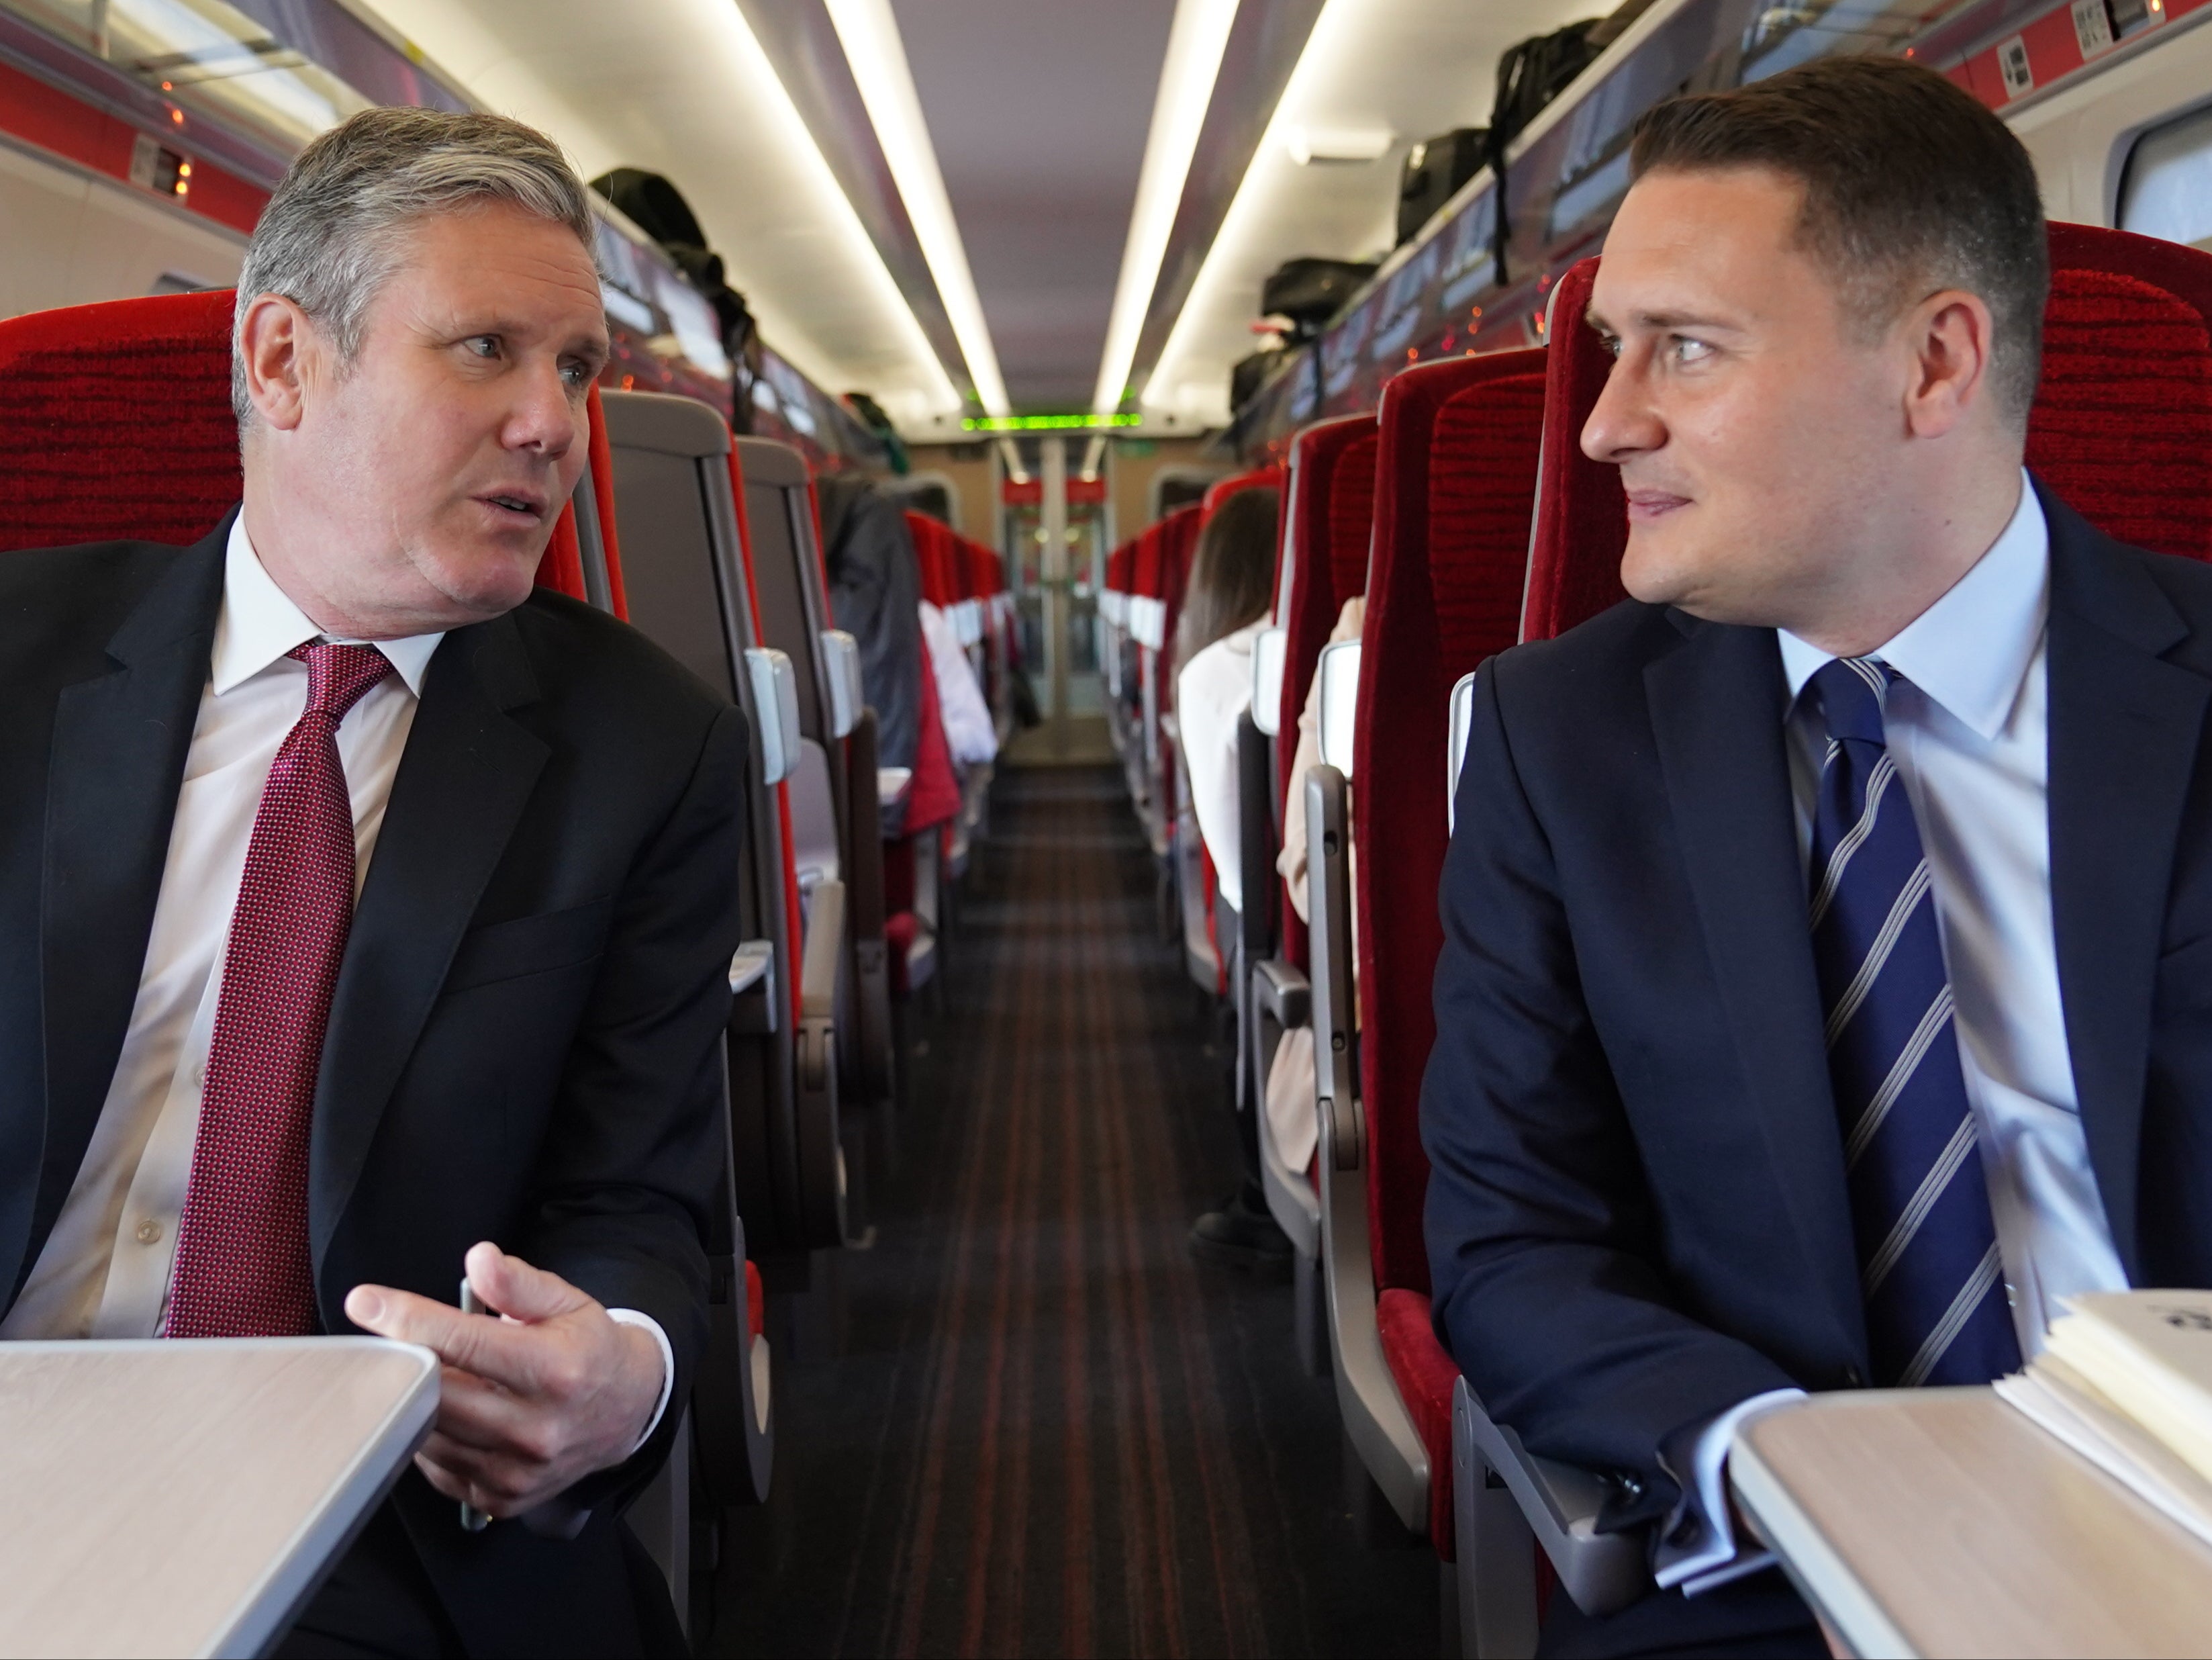 With the backing of Keir Starmer, the shadow health secretary has promised a ‘tough love’ approach to running the NHS